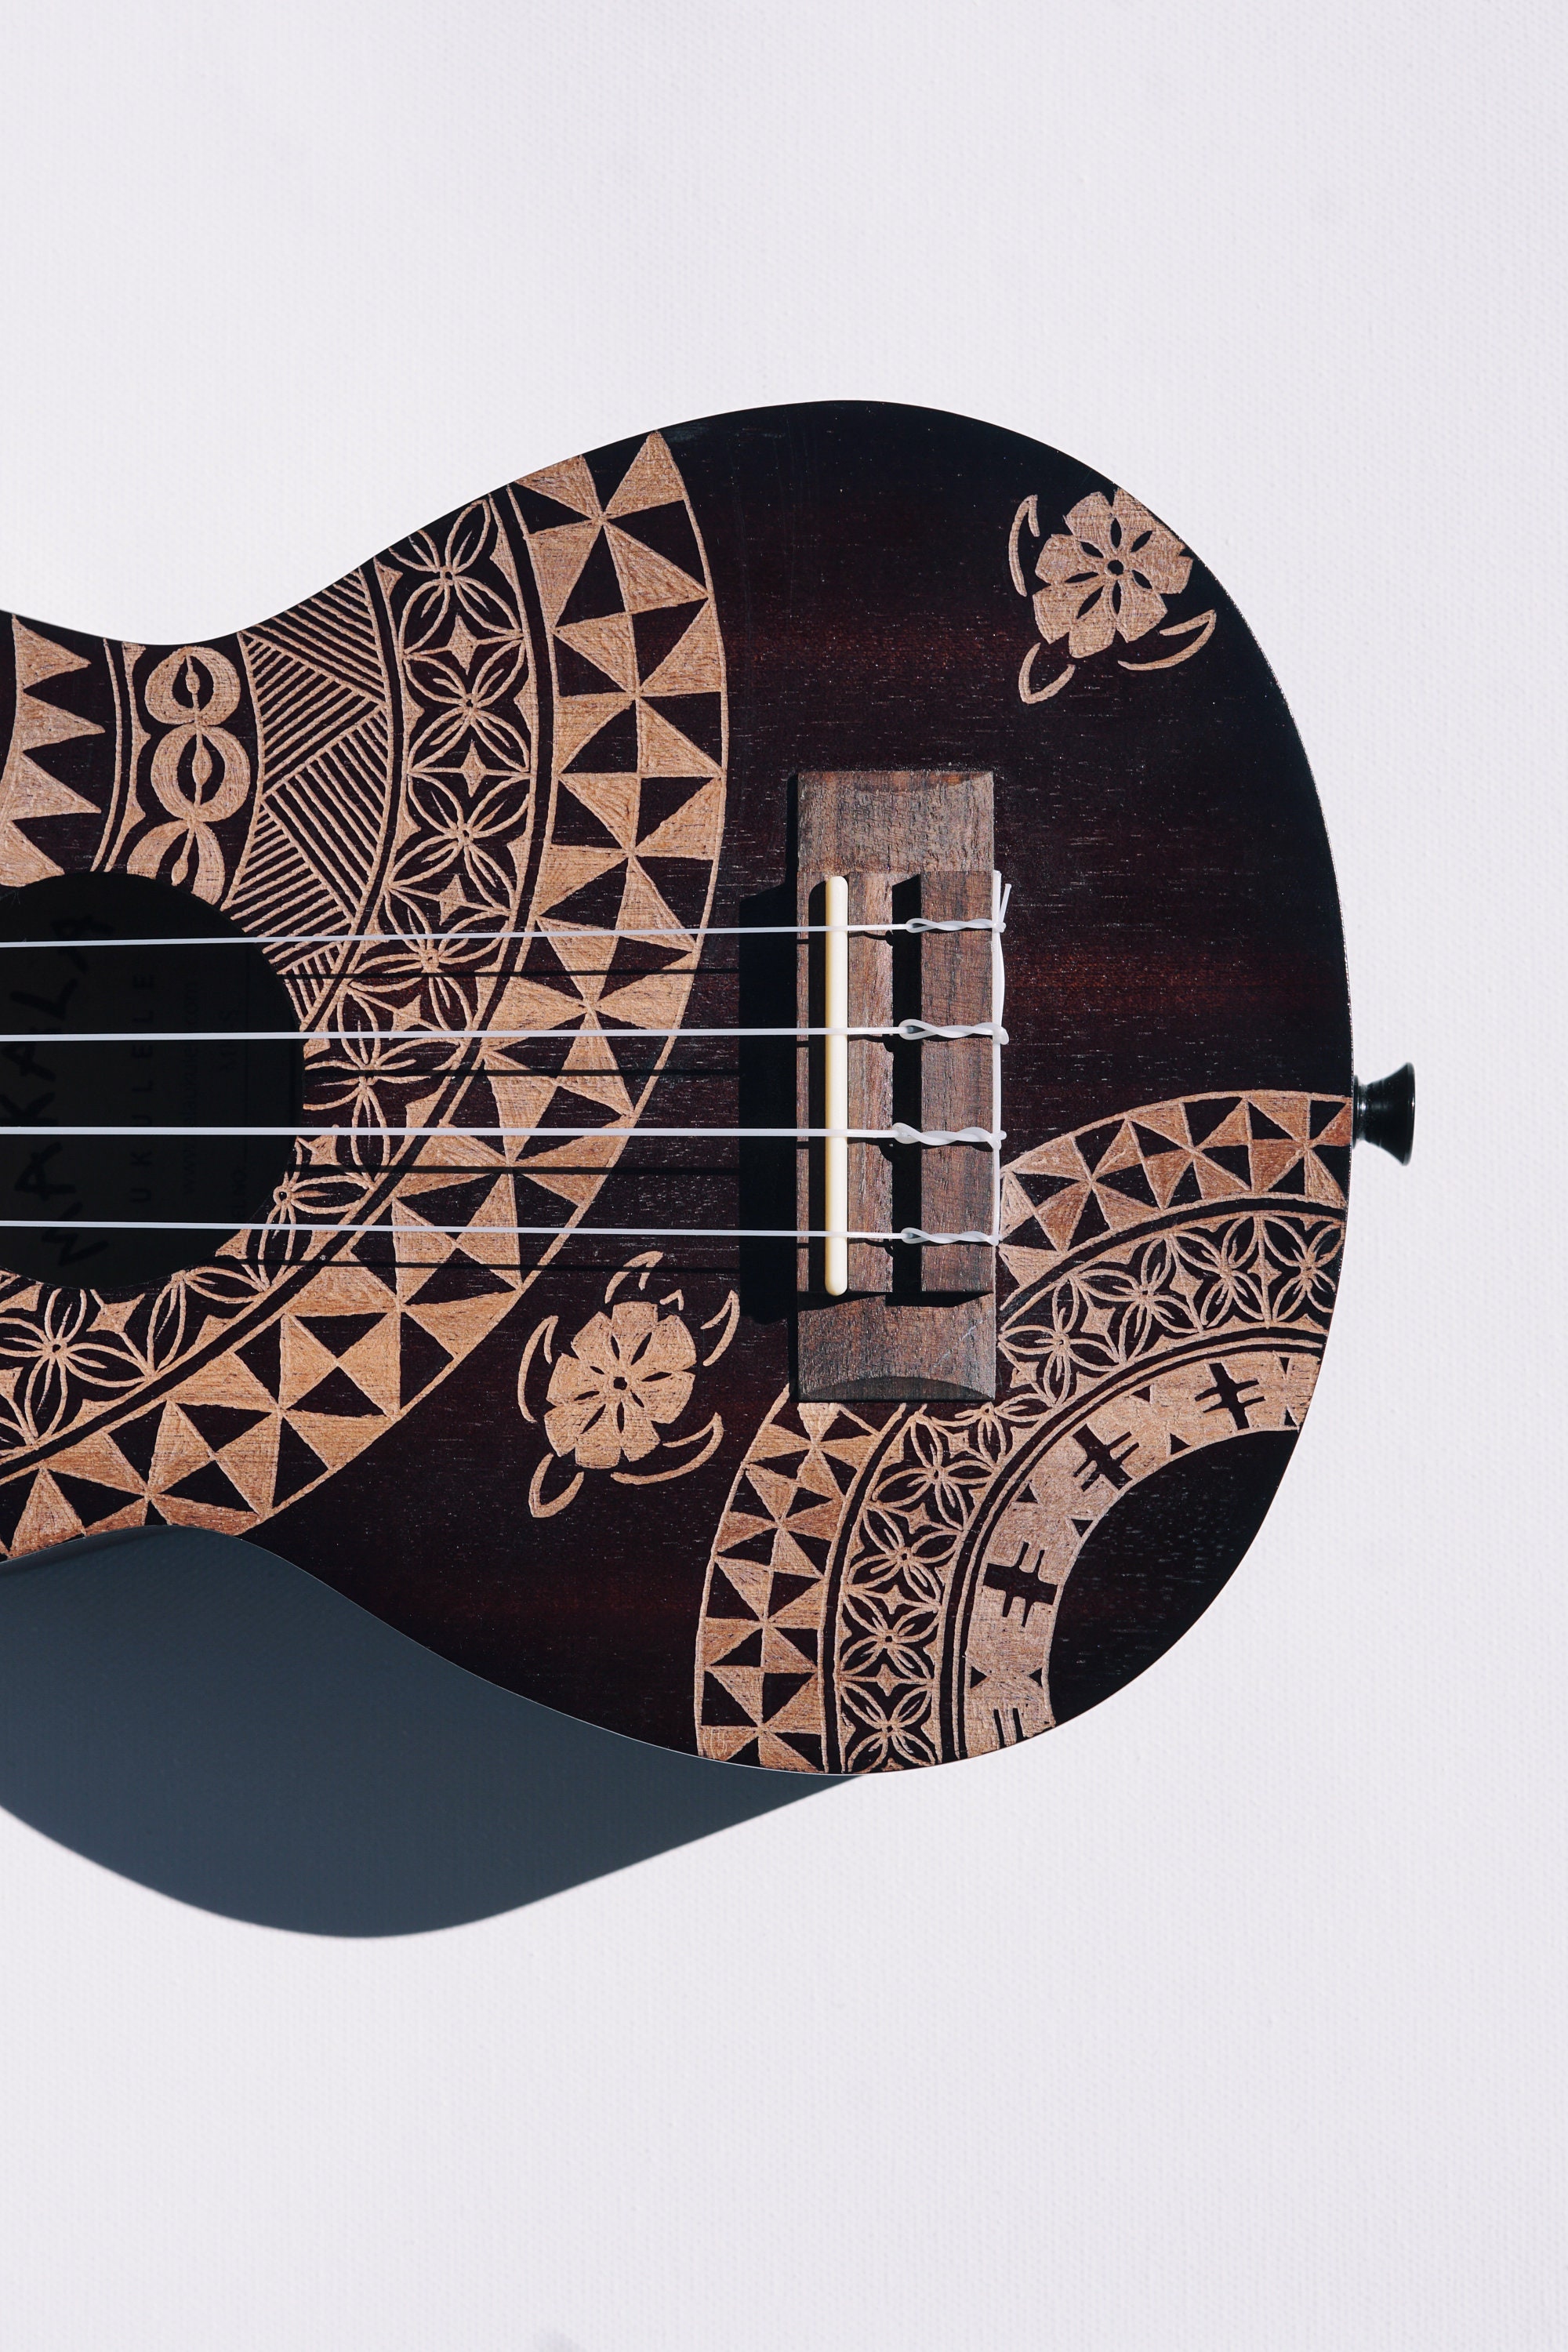 Tattoo Tribal Pattern Ukulele Hawaii Music  Tapestry for Sale by  LoreeLabrie